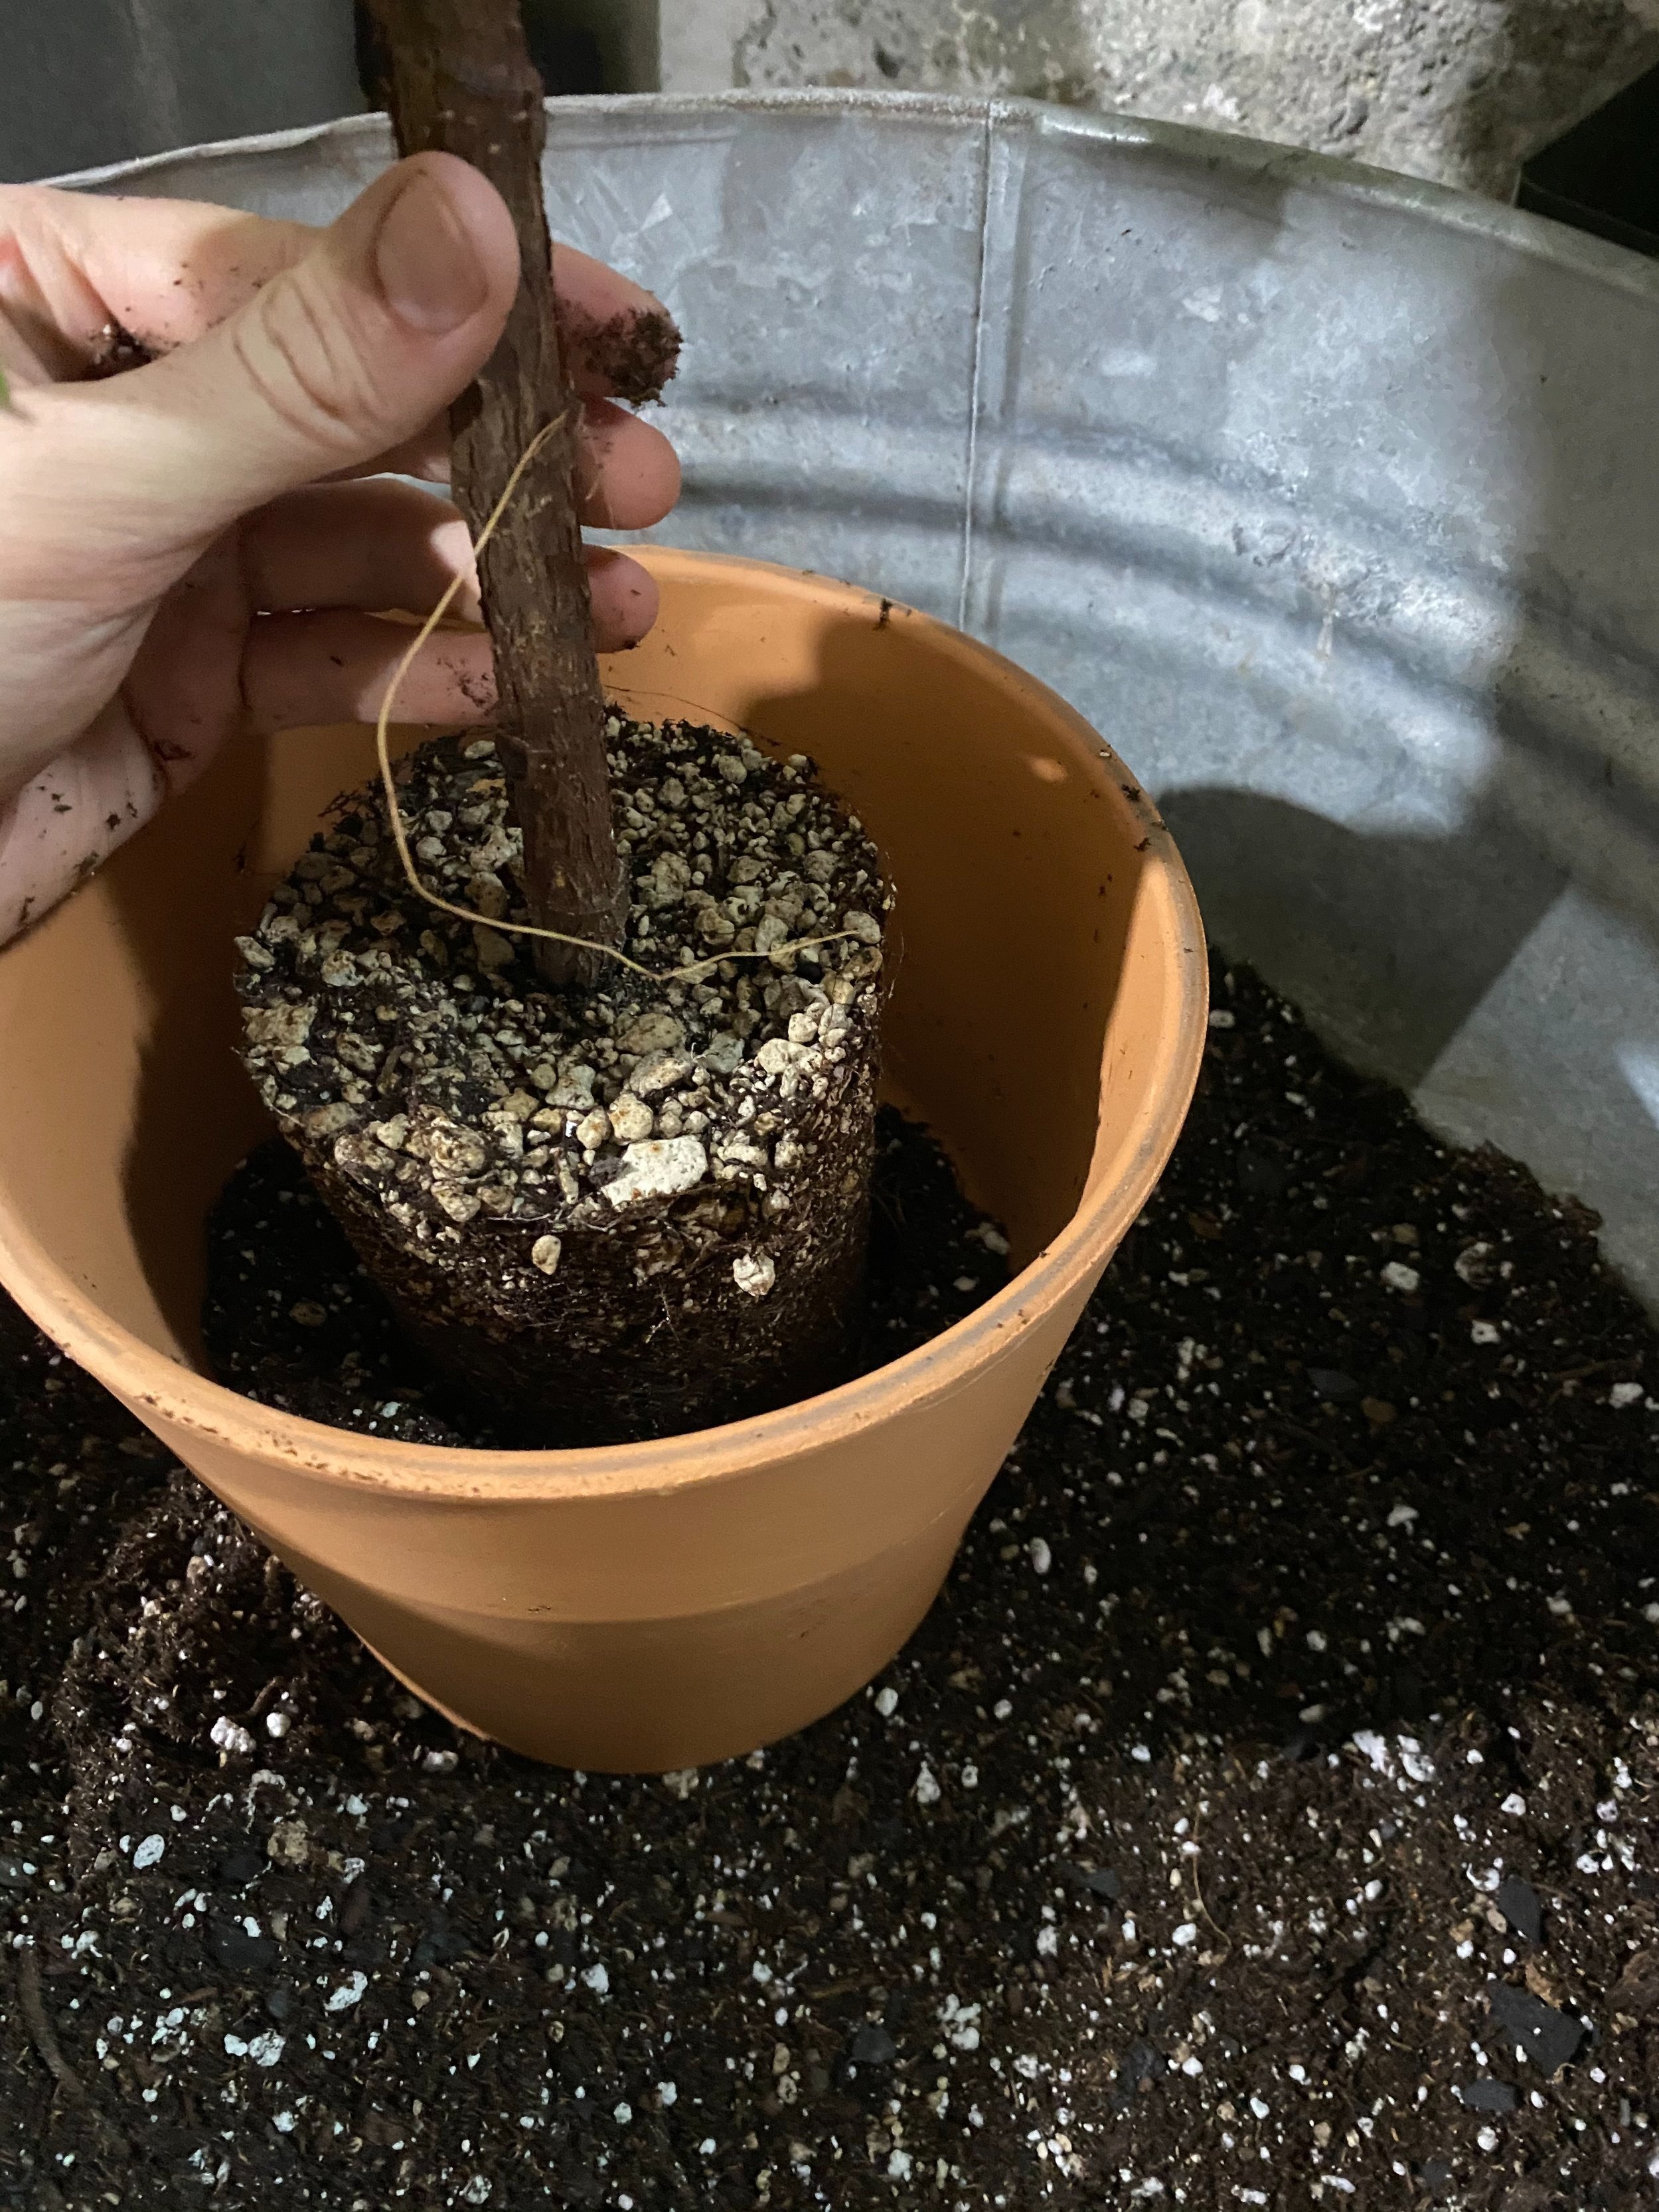  This pot is just large enough to hold the root ball, with space for some fresh substrate, but not too much - it’ll need to be potted into a larger container fairly soon, but for now, it just needs to establish on its own roots. 